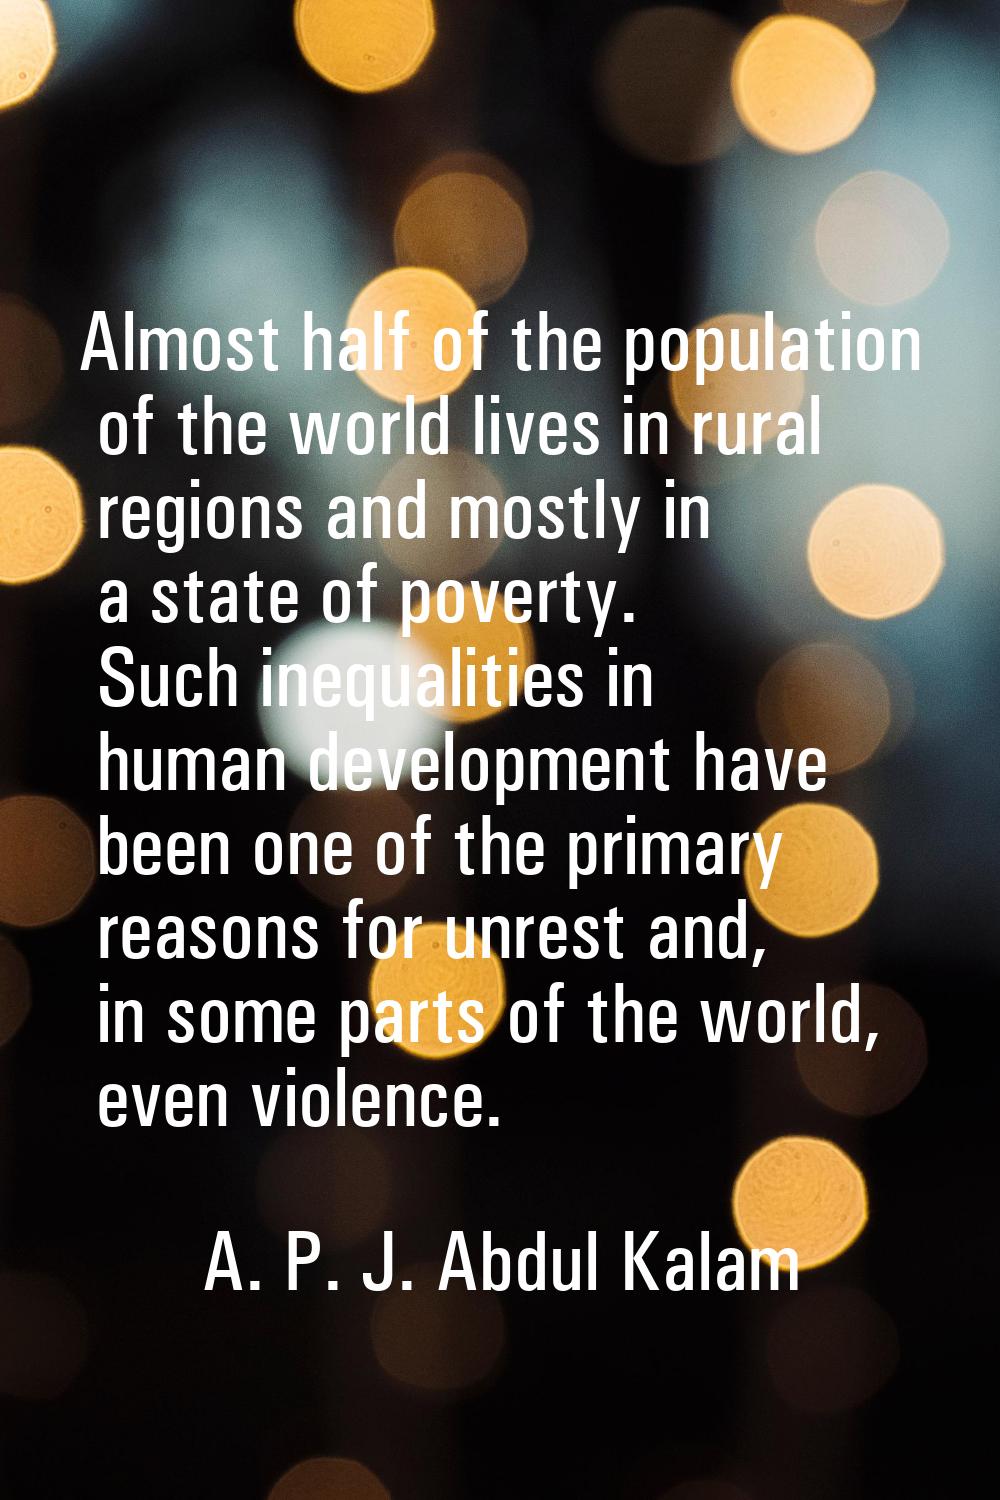 Almost half of the population of the world lives in rural regions and mostly in a state of poverty.